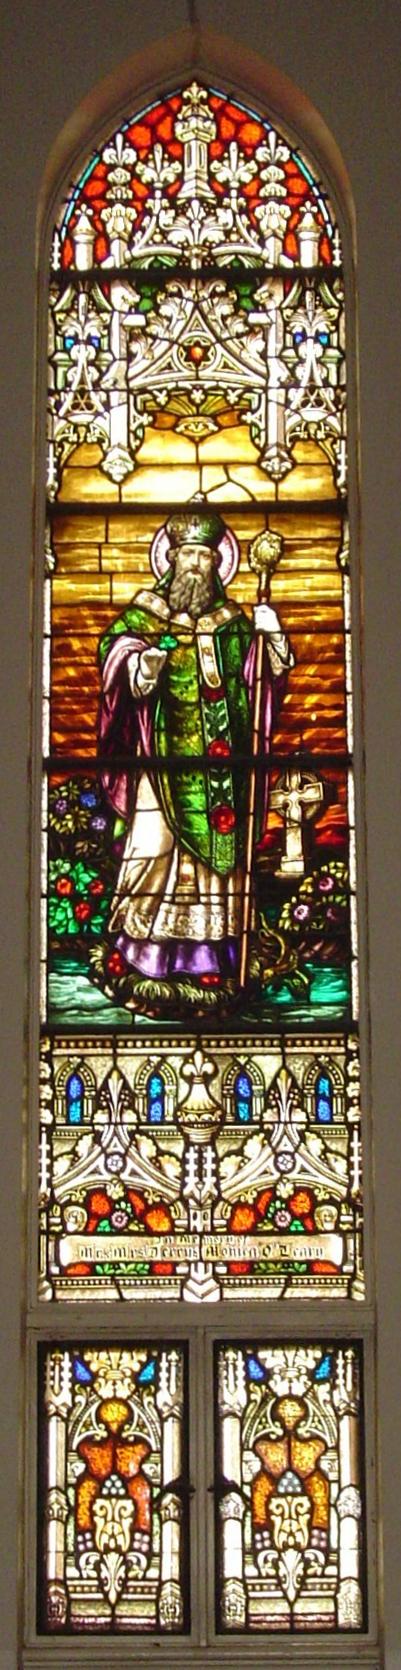 One of many stained glass windows at Holy Name Church